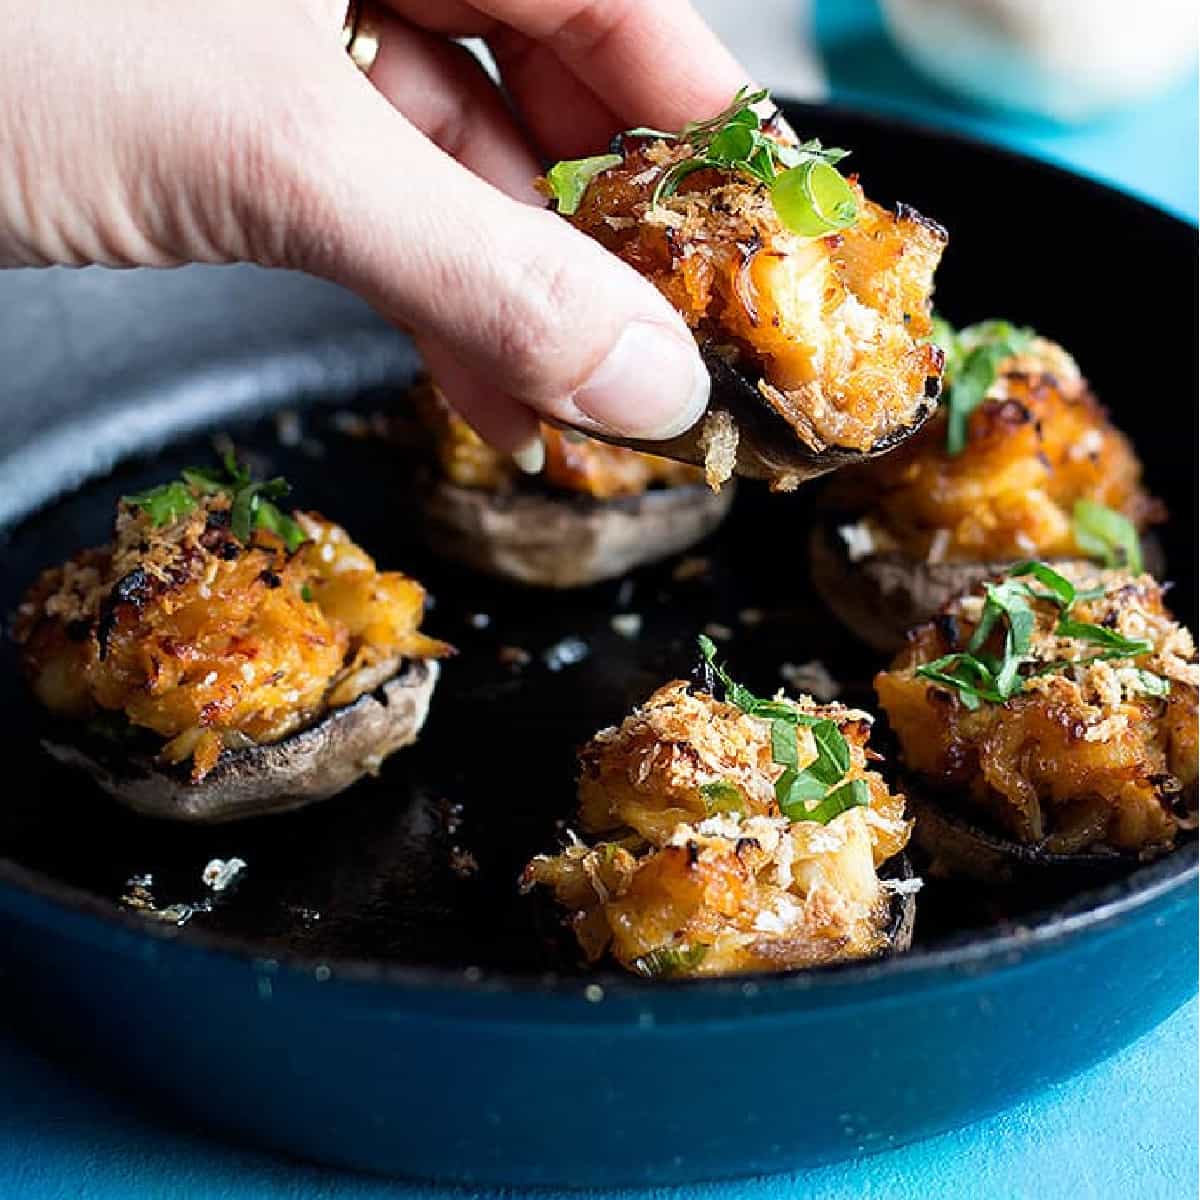 Spicy crab stuffed mushrooms are the perfect appetizer! Juicy mushrooms filled with a spicy crab filling are so delicious and easy to make.
